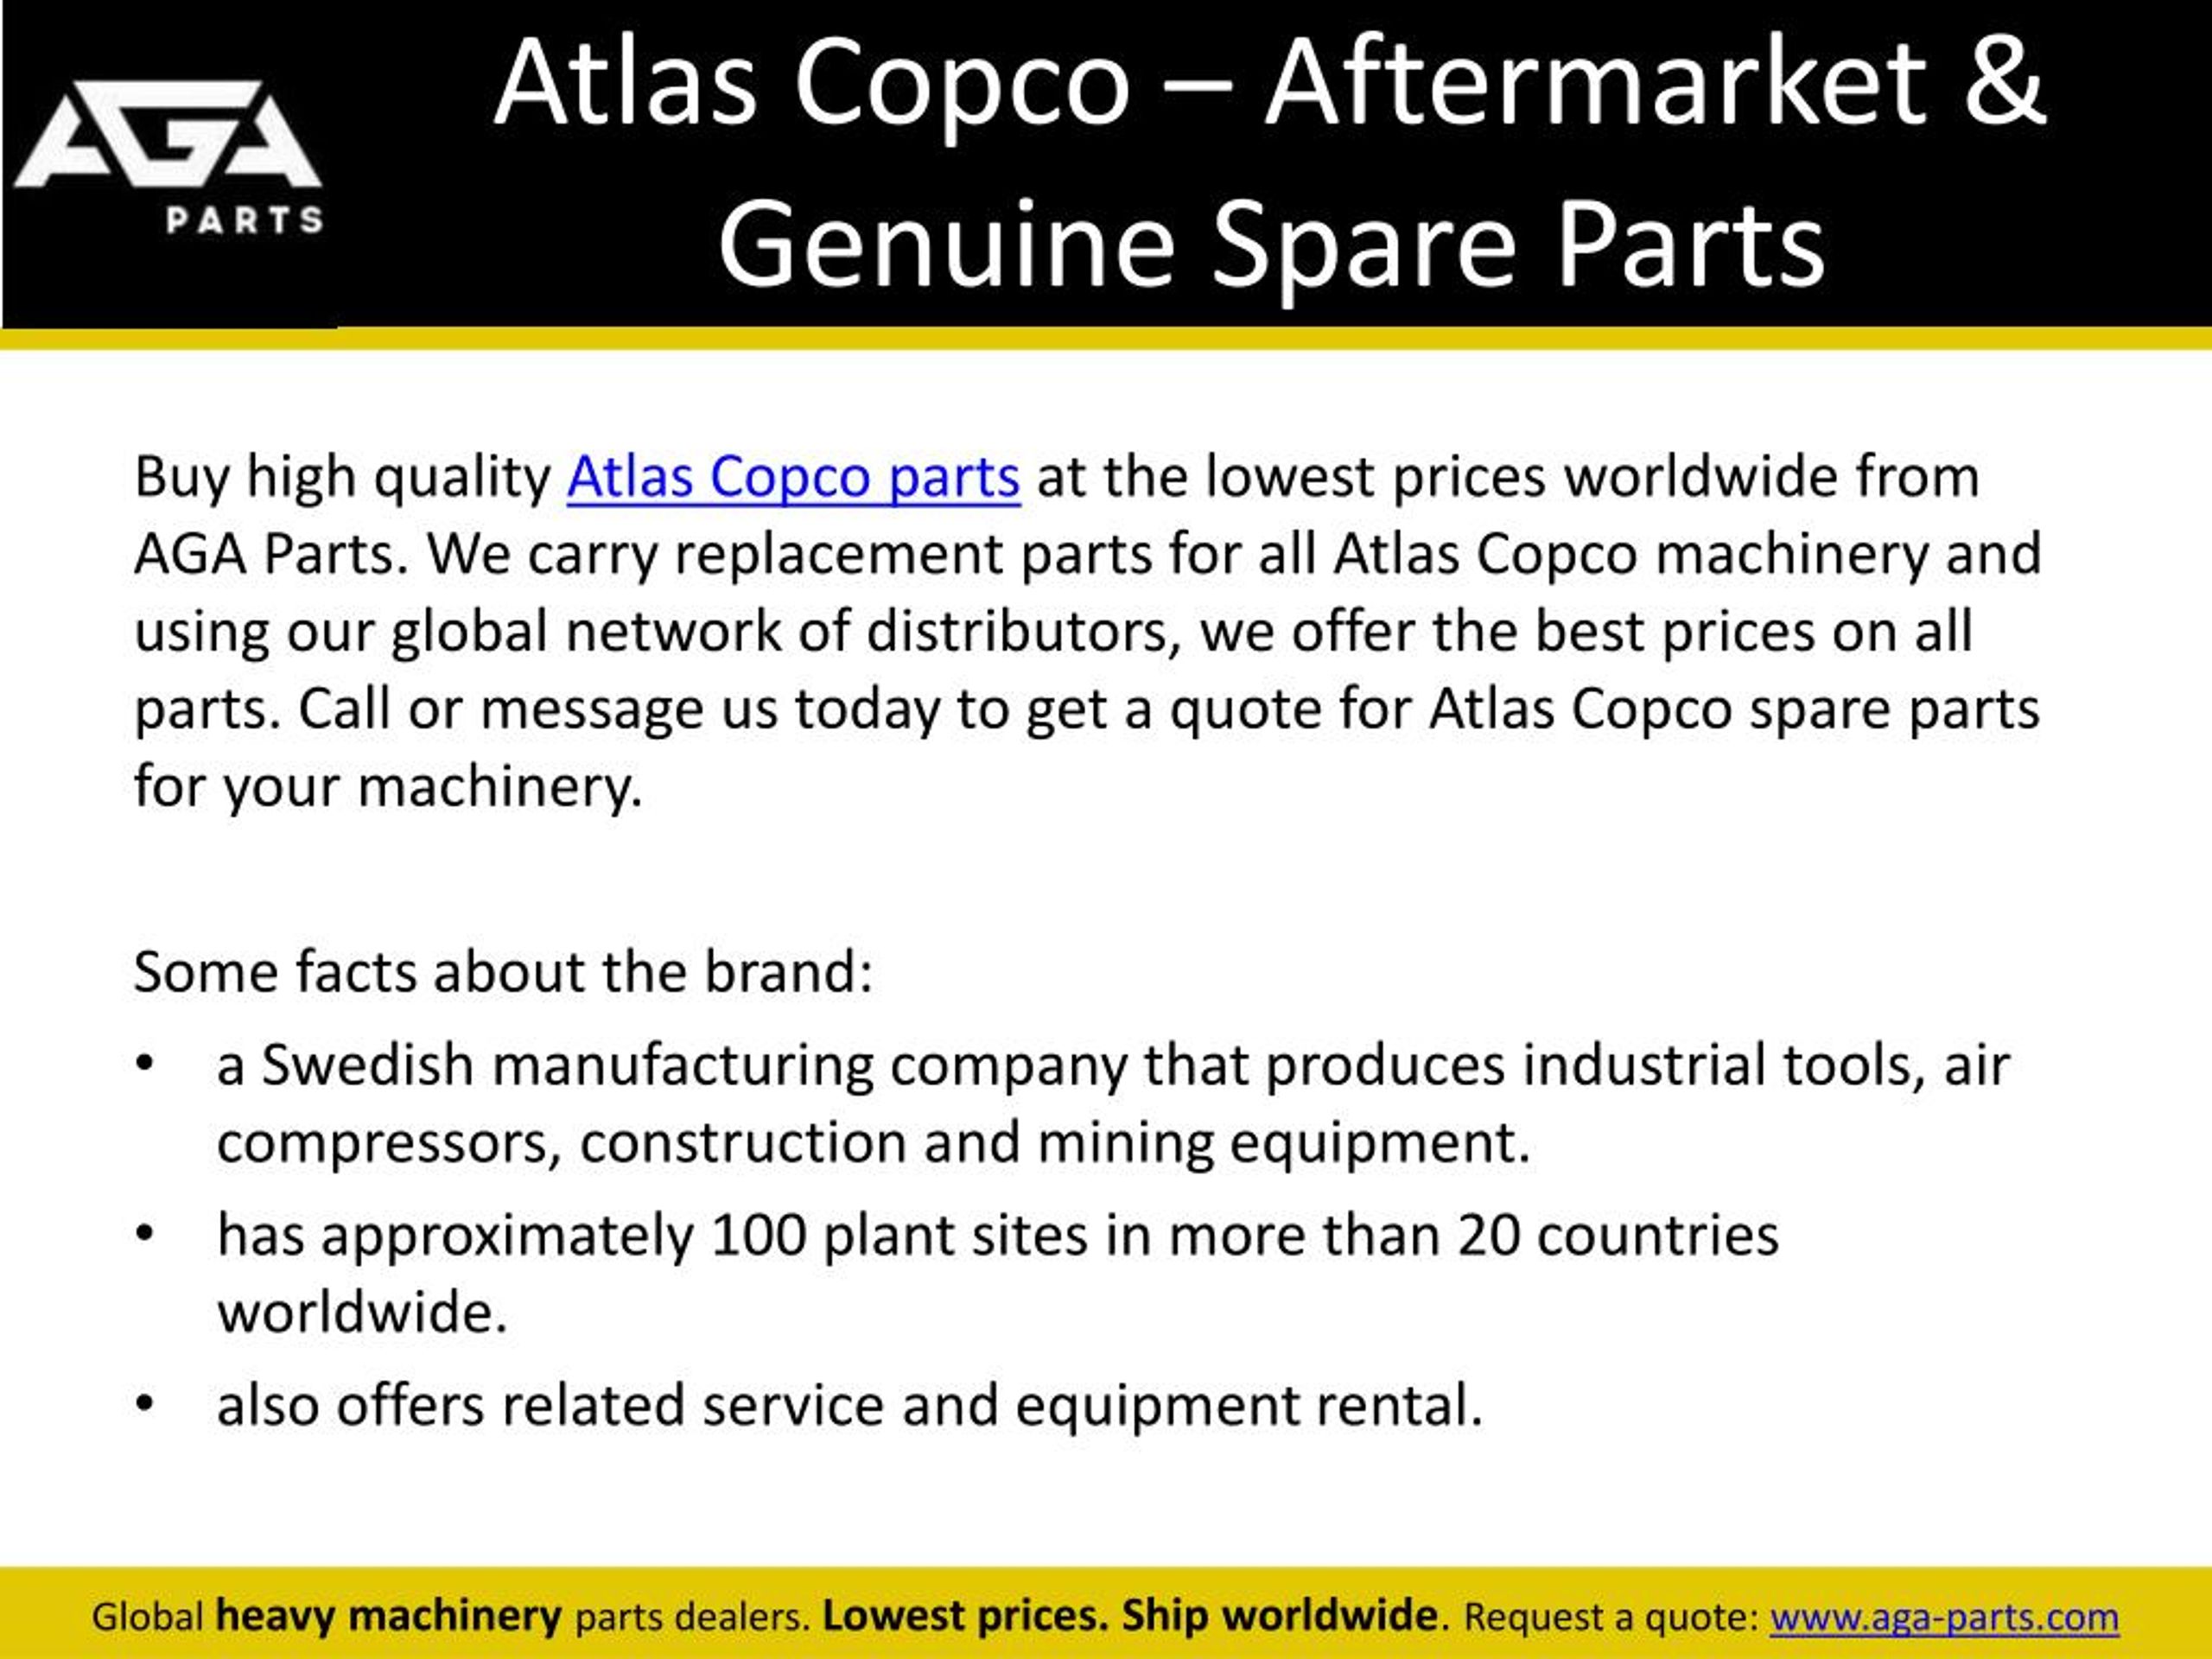 PPT - Atlas Copco Parts for Heavy Machinery by AGA Parts PowerPoint